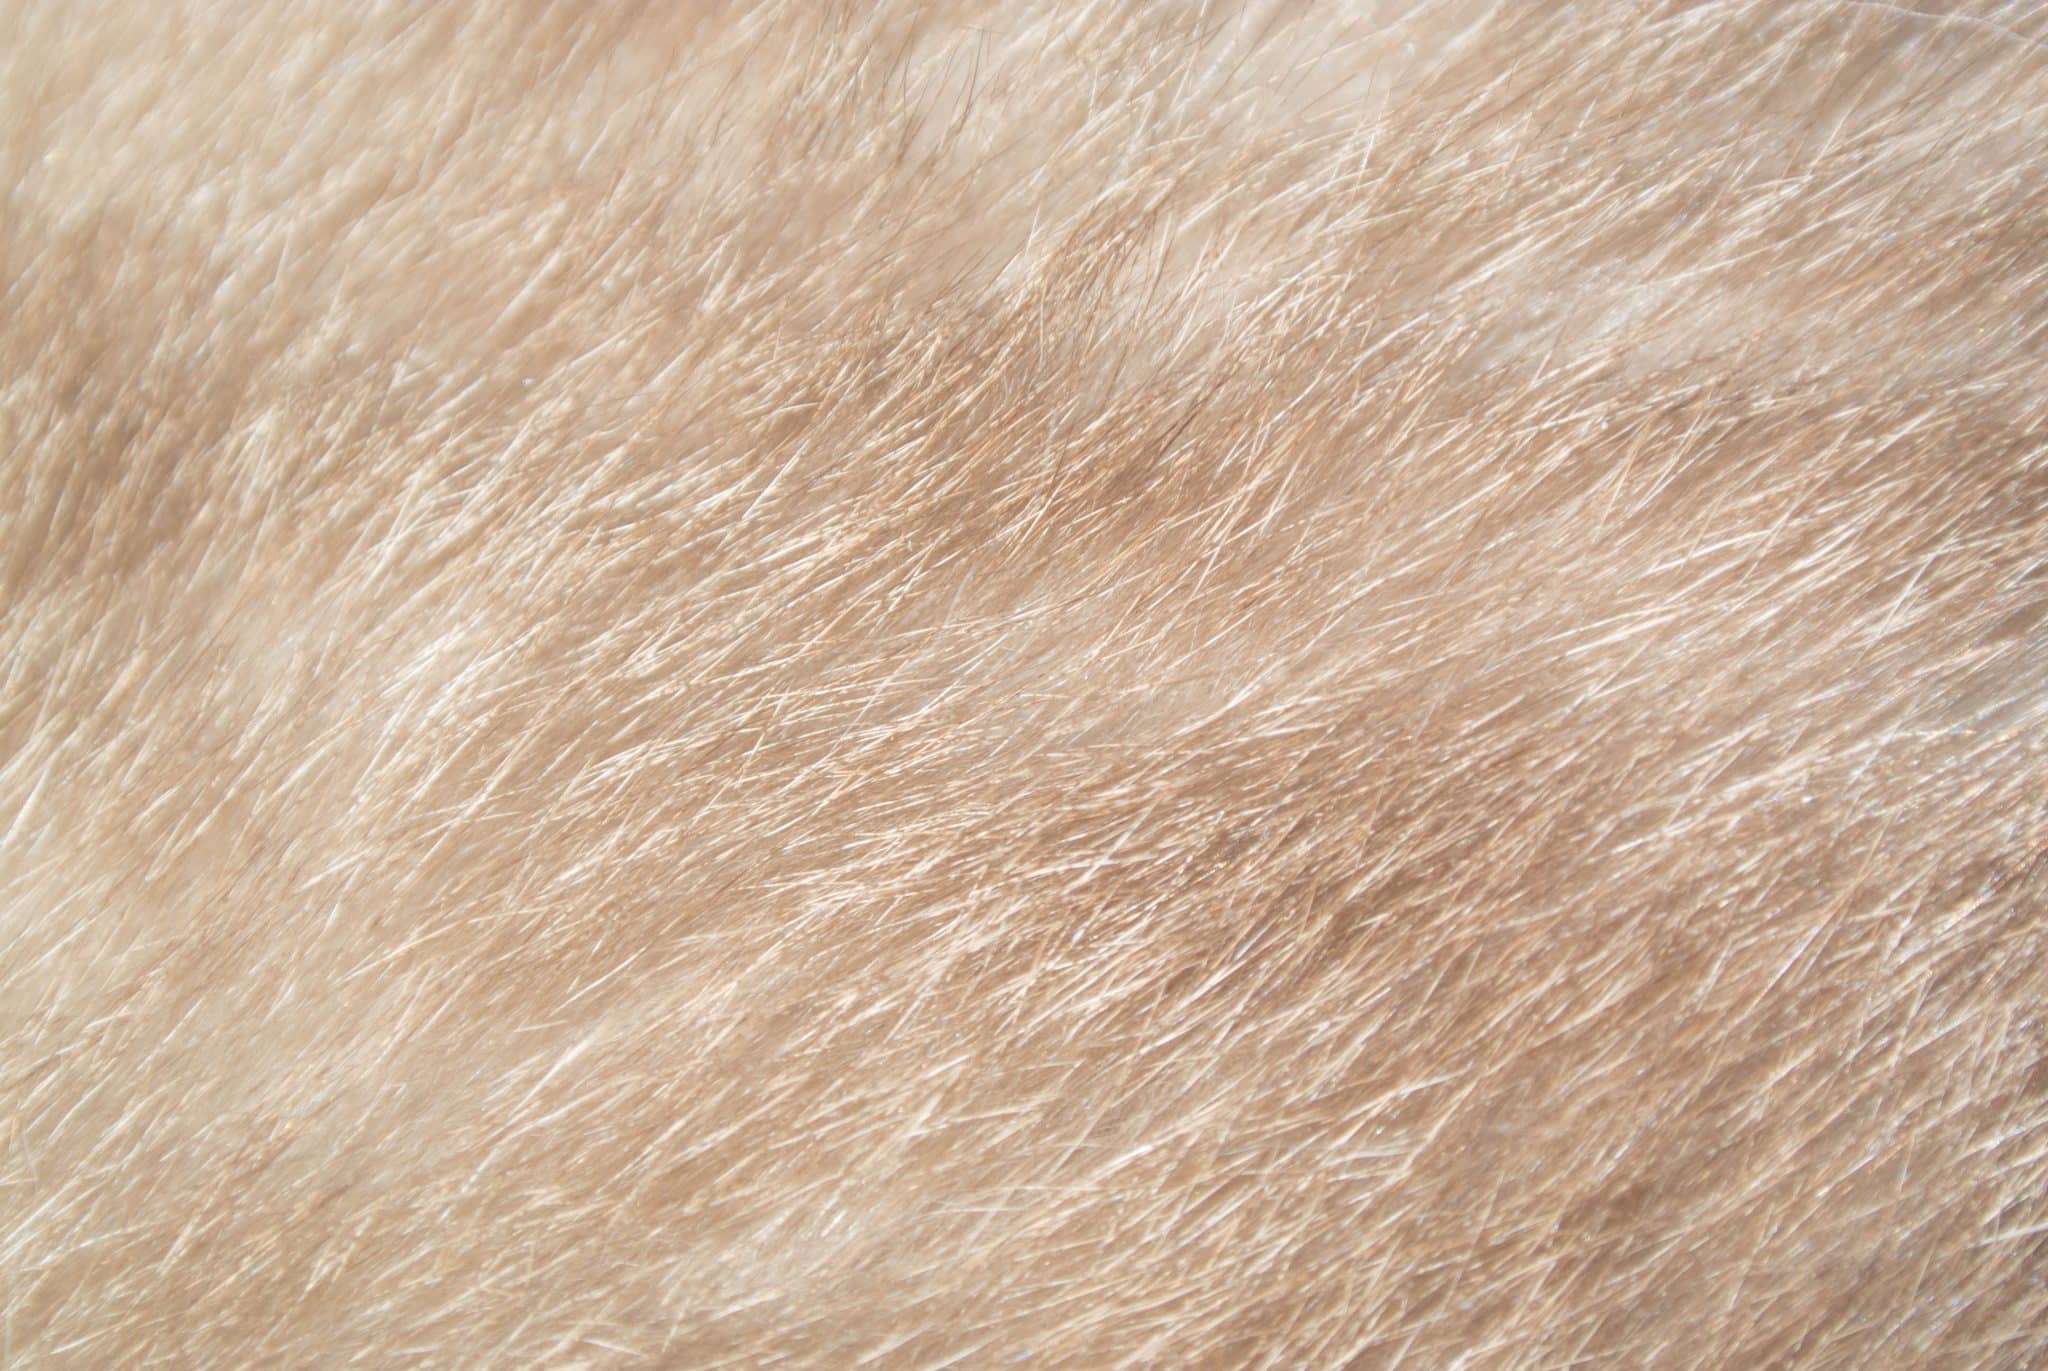 Pet parents, here's the deal:   Alopecia in dogs can have many different symptoms - besides hair loss - and just as many underlying illnesses, infections, and conditions. Sometimes the cause is as simple as pressure sores for laying on hard surfaces - but other times, it's something much more serious.   Mange